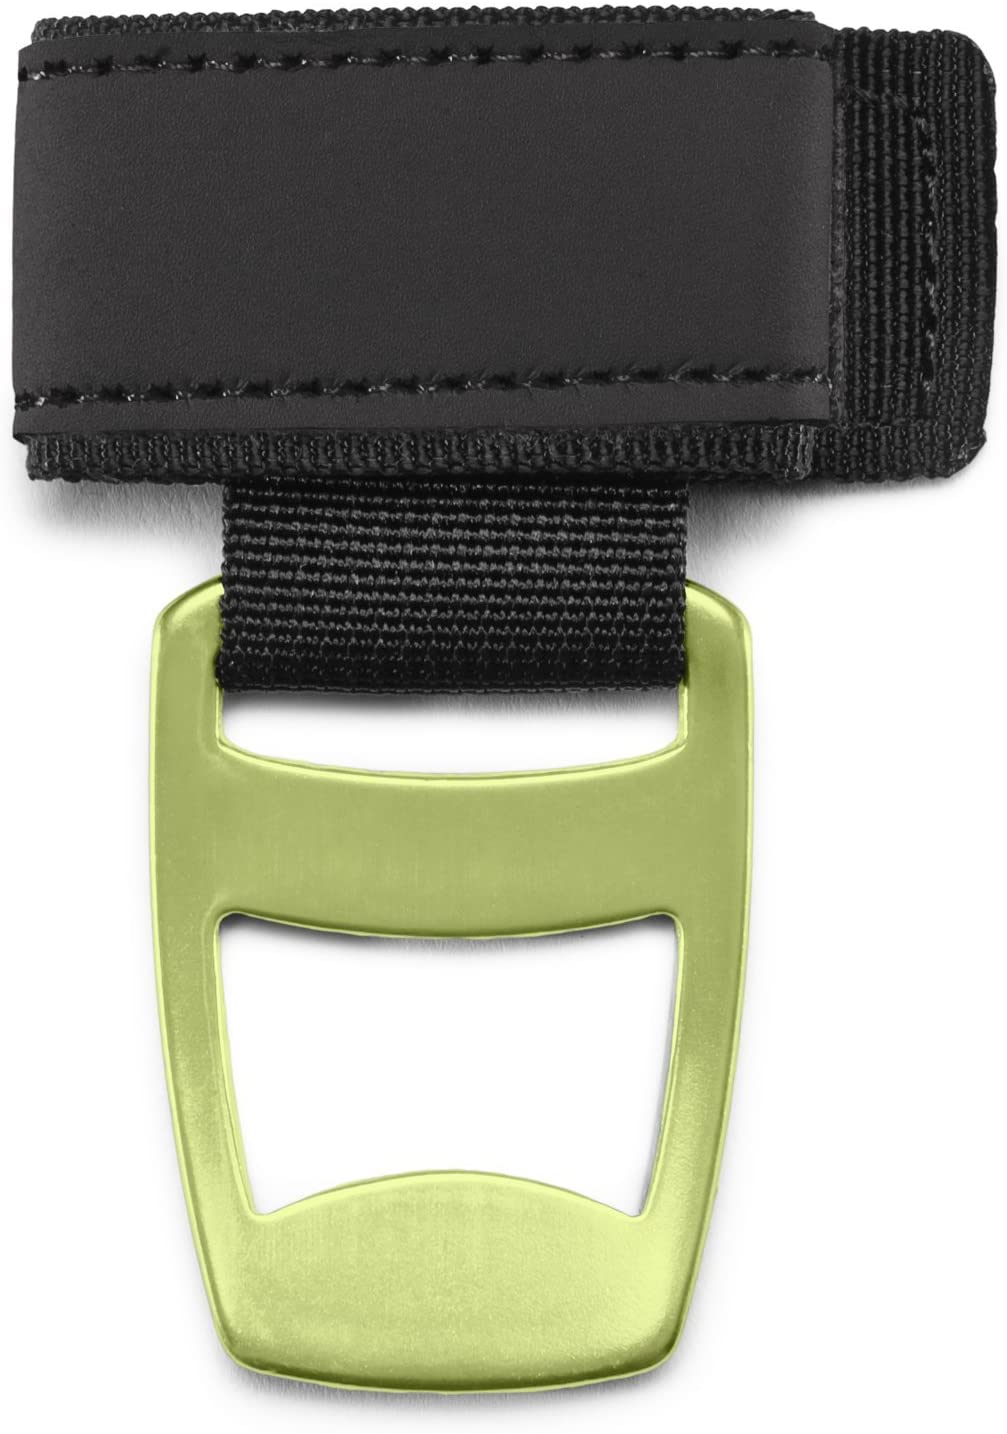 Timbuk2 Beer Candy Bottle Opener: Lime